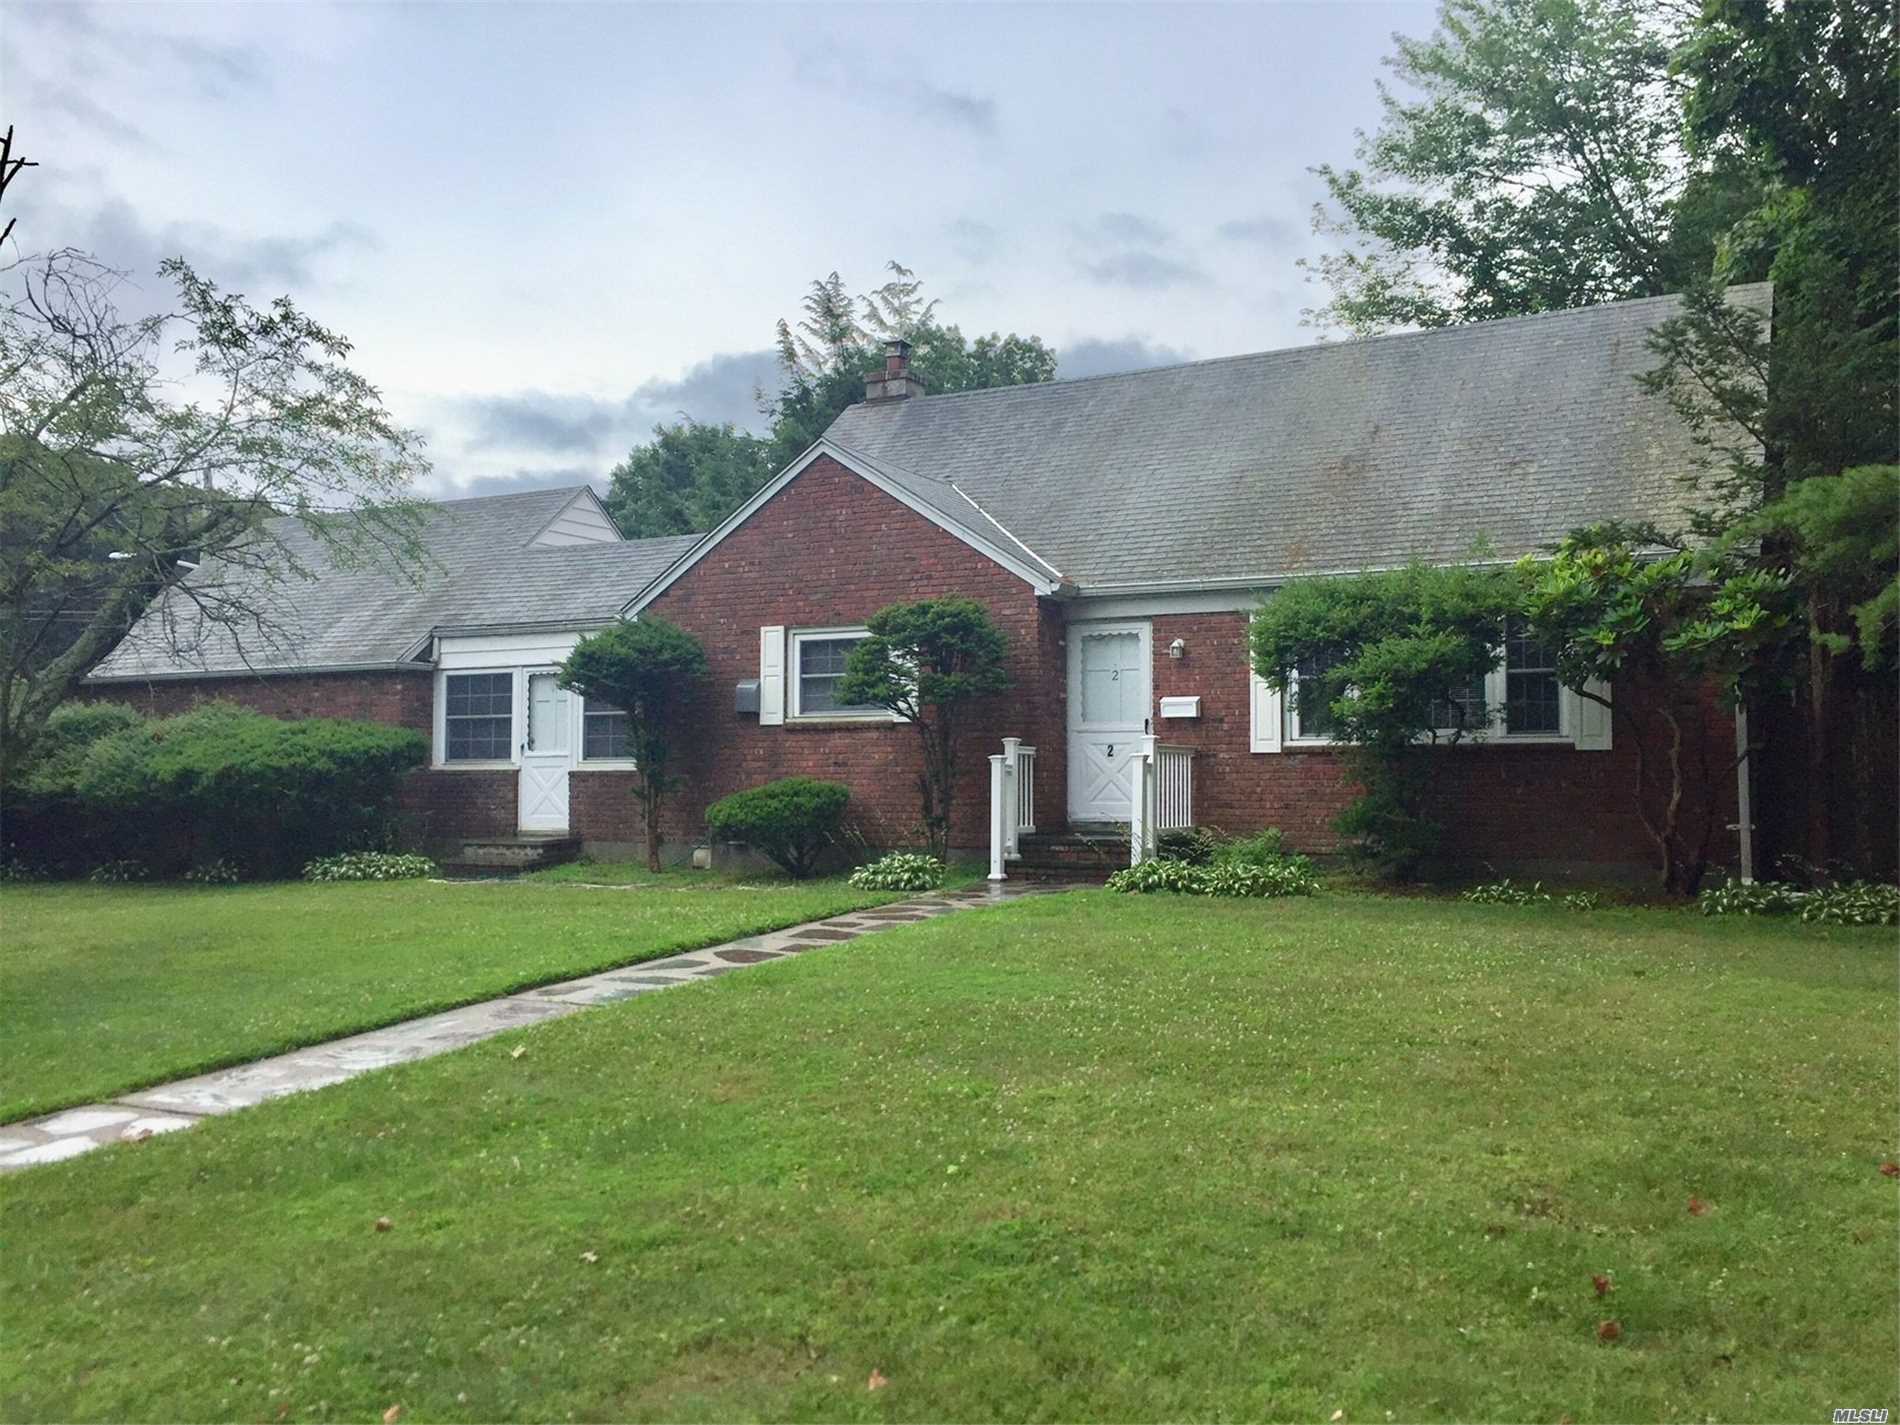 All Brick Move-In Ready Ranch On Flat 1/3 Acre W/ Att 2-Car Garage & Completely Fenced Large Backyard With New Stone Patio. 12&rsquo;X18&rsquo; Den/Dining Rm Off Updated Bright Eat-In Kitchen, New Full Bath, Central Air, Hardwood Flrs, Gas Heat & Sprinklers. Full Staircase To 2nd Level, Waiting To Be Finished. Huge Unfinished Basement With New Laundry, 200 Amps, Separate Hw Heater & Outside Entrance. Convenient To Trains, All The Amenities & Beaches Huntington Has To Offer! Taxes Are Being Grieved.